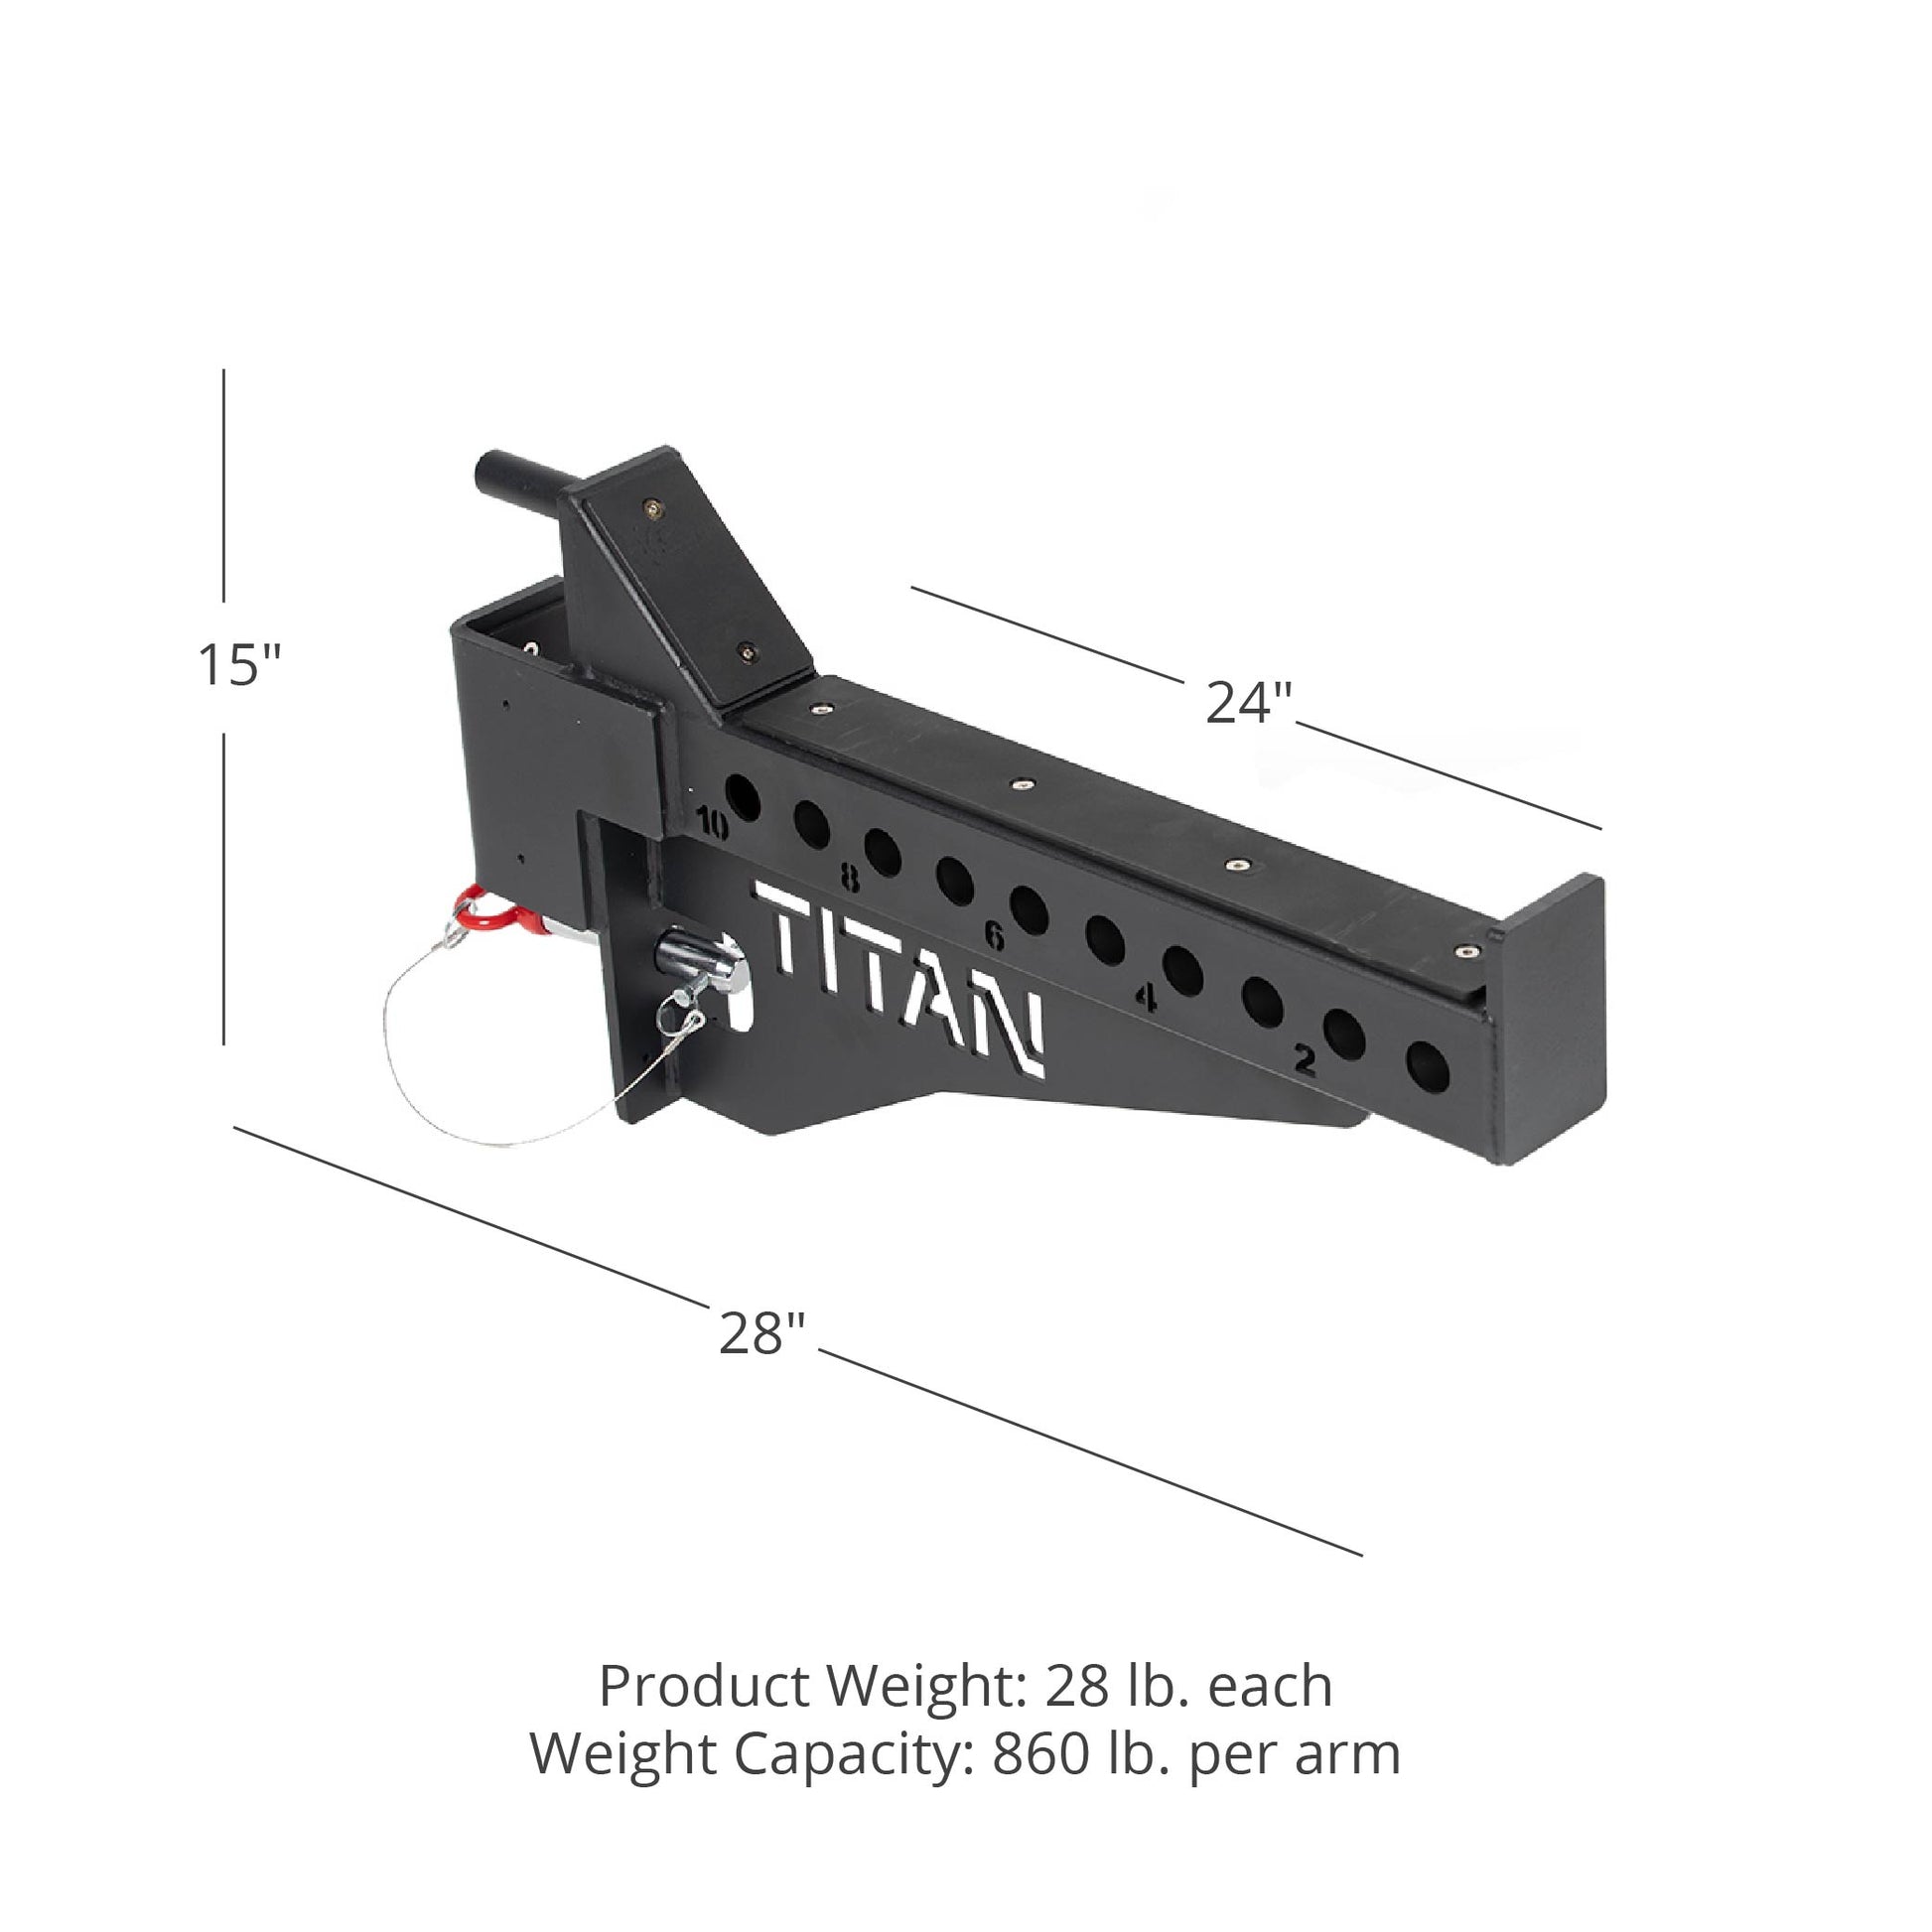 TITAN Series Spotter Arms - 24" Useable Length x 28" Overall Length